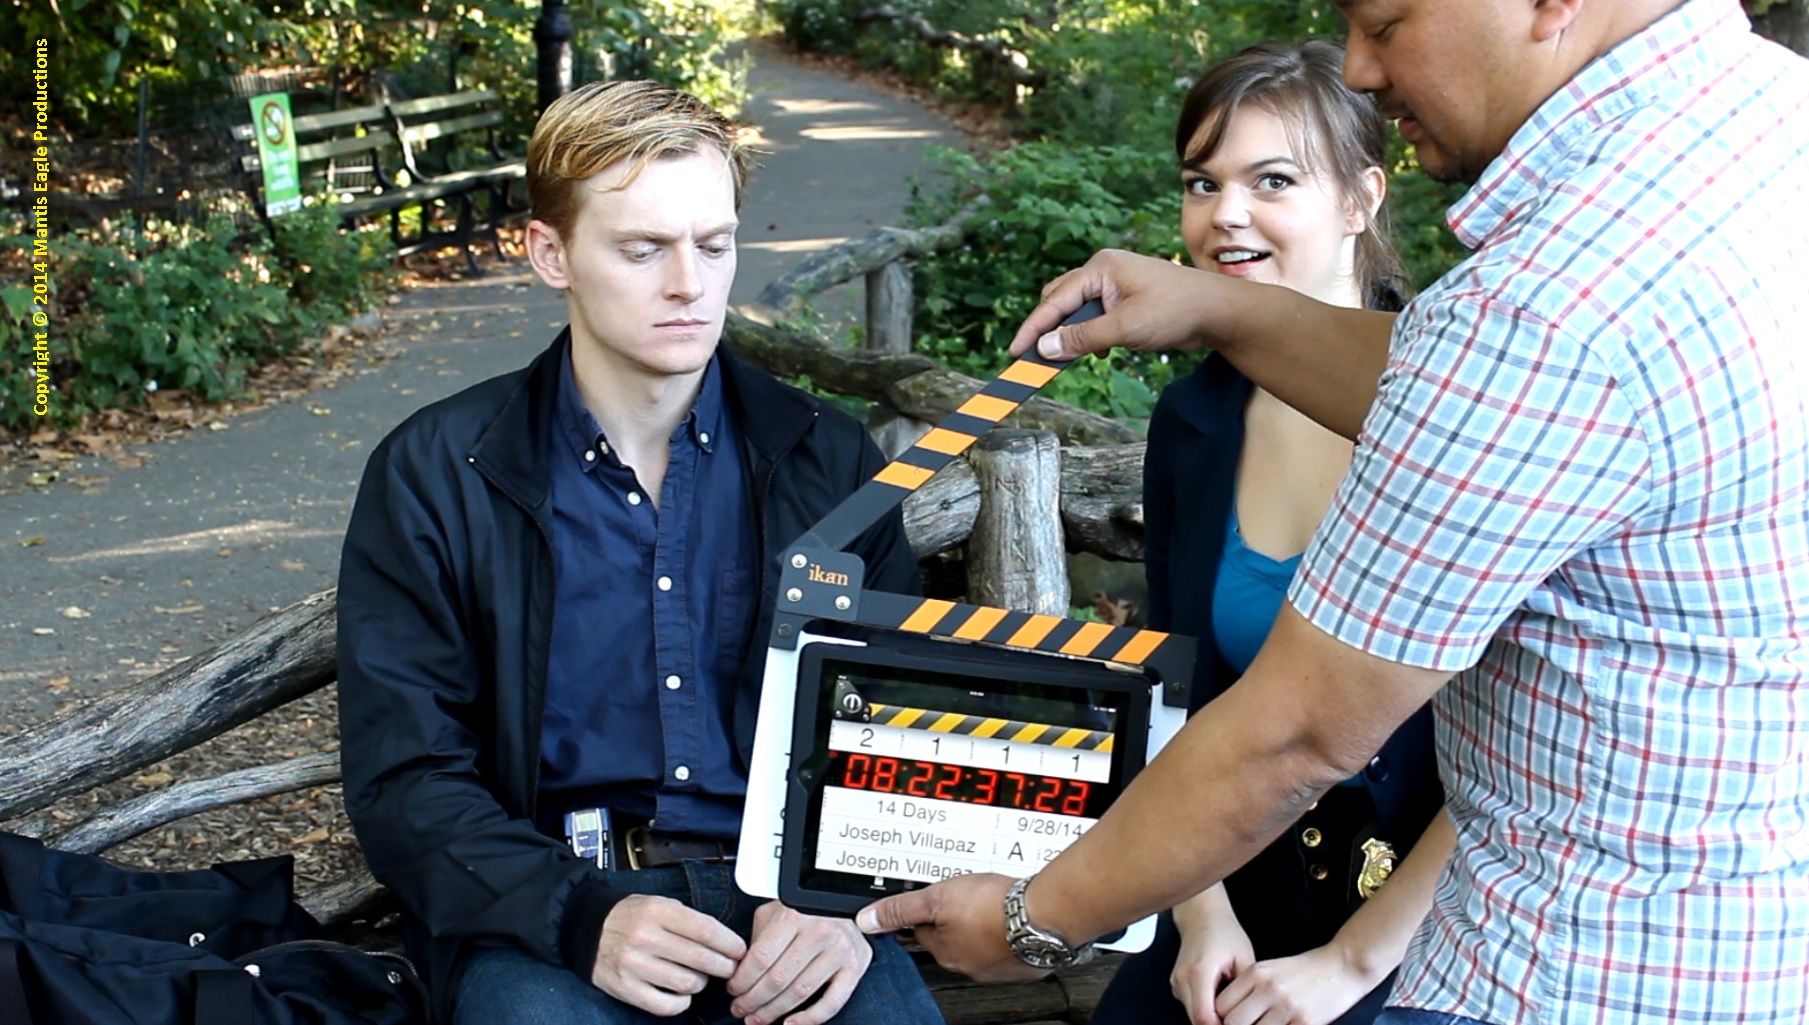 Michael Wetherbee and Emily Dennis ready to shoot their scene and director Joseph Villapaz works the slate.